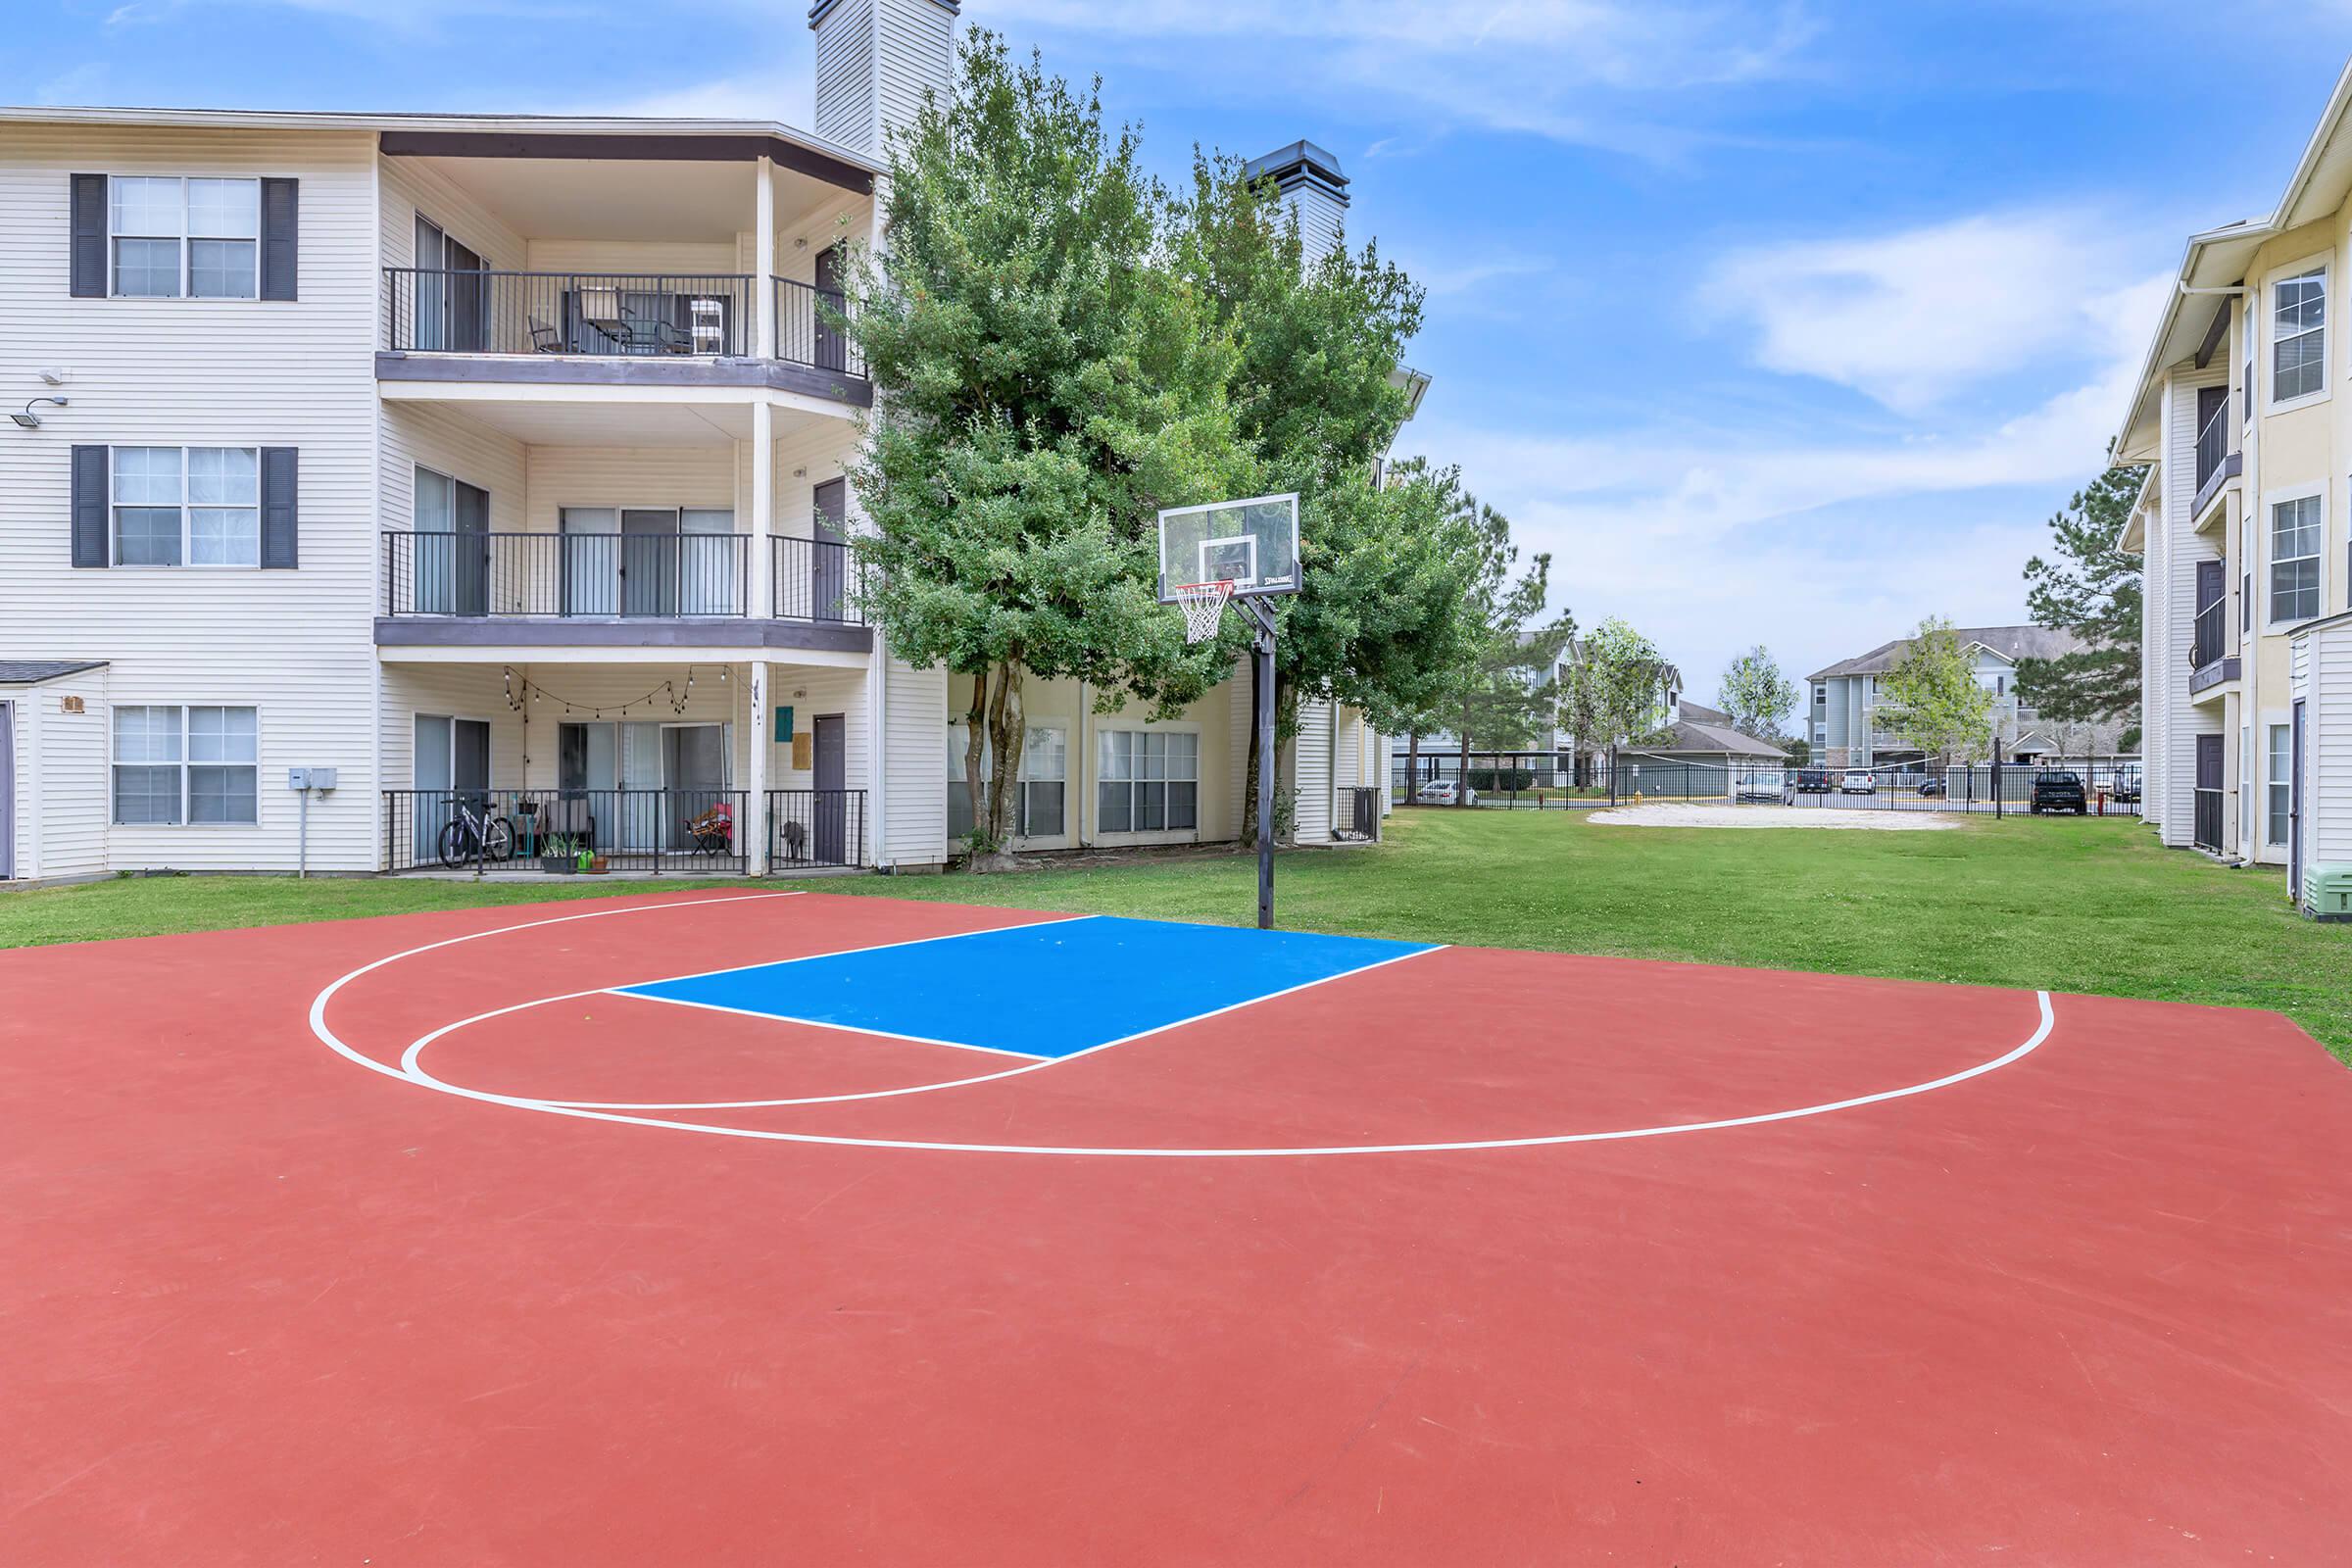 PLAY ON THE BASKETBALL COURT